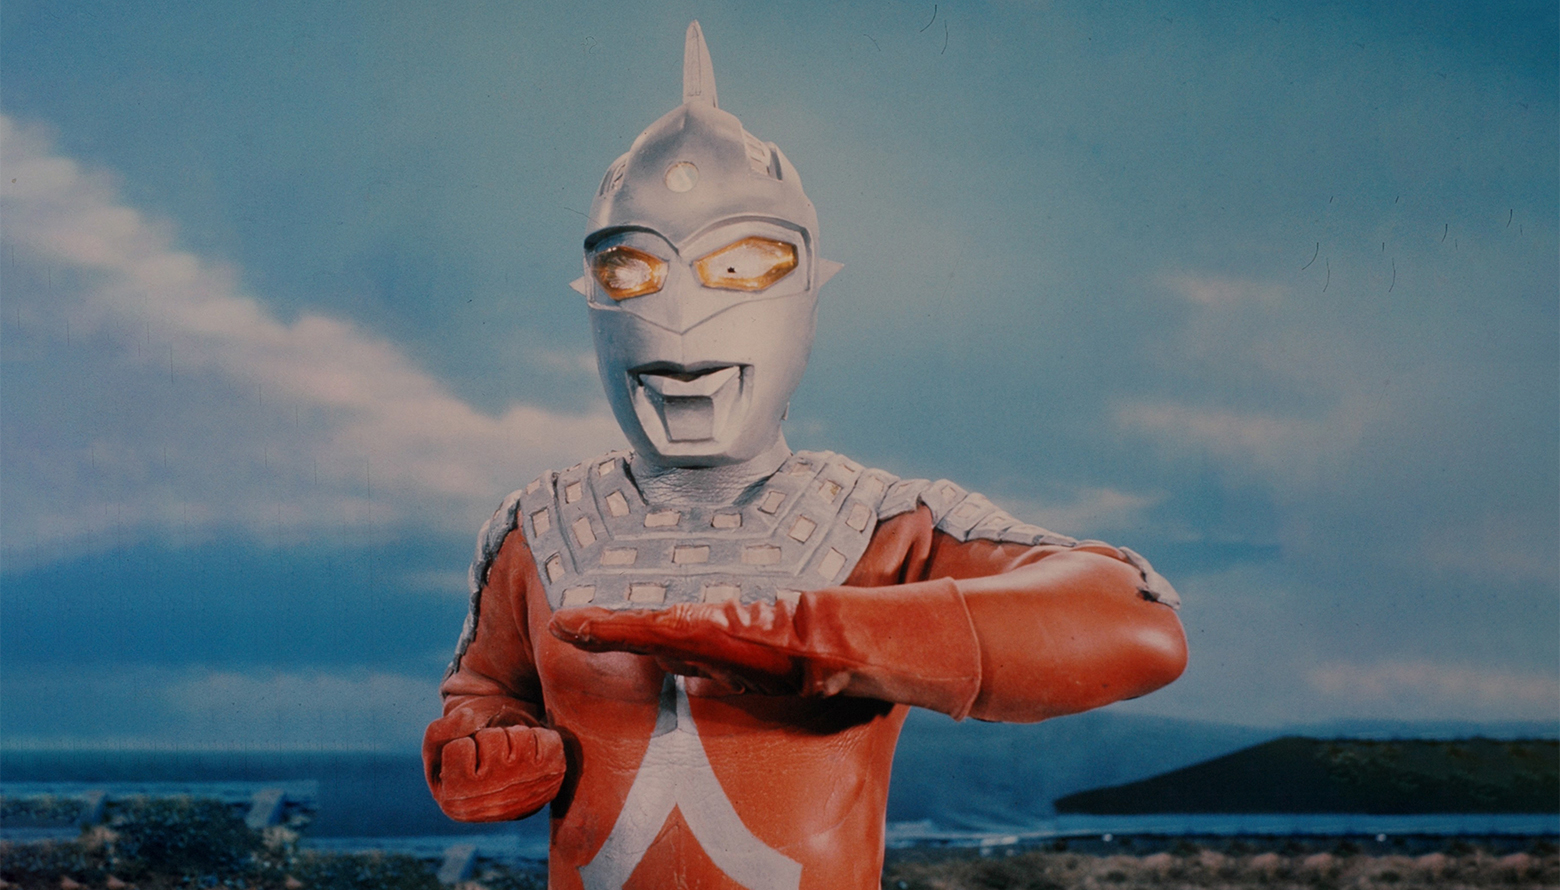 WHO IS ULTRASEVEN?